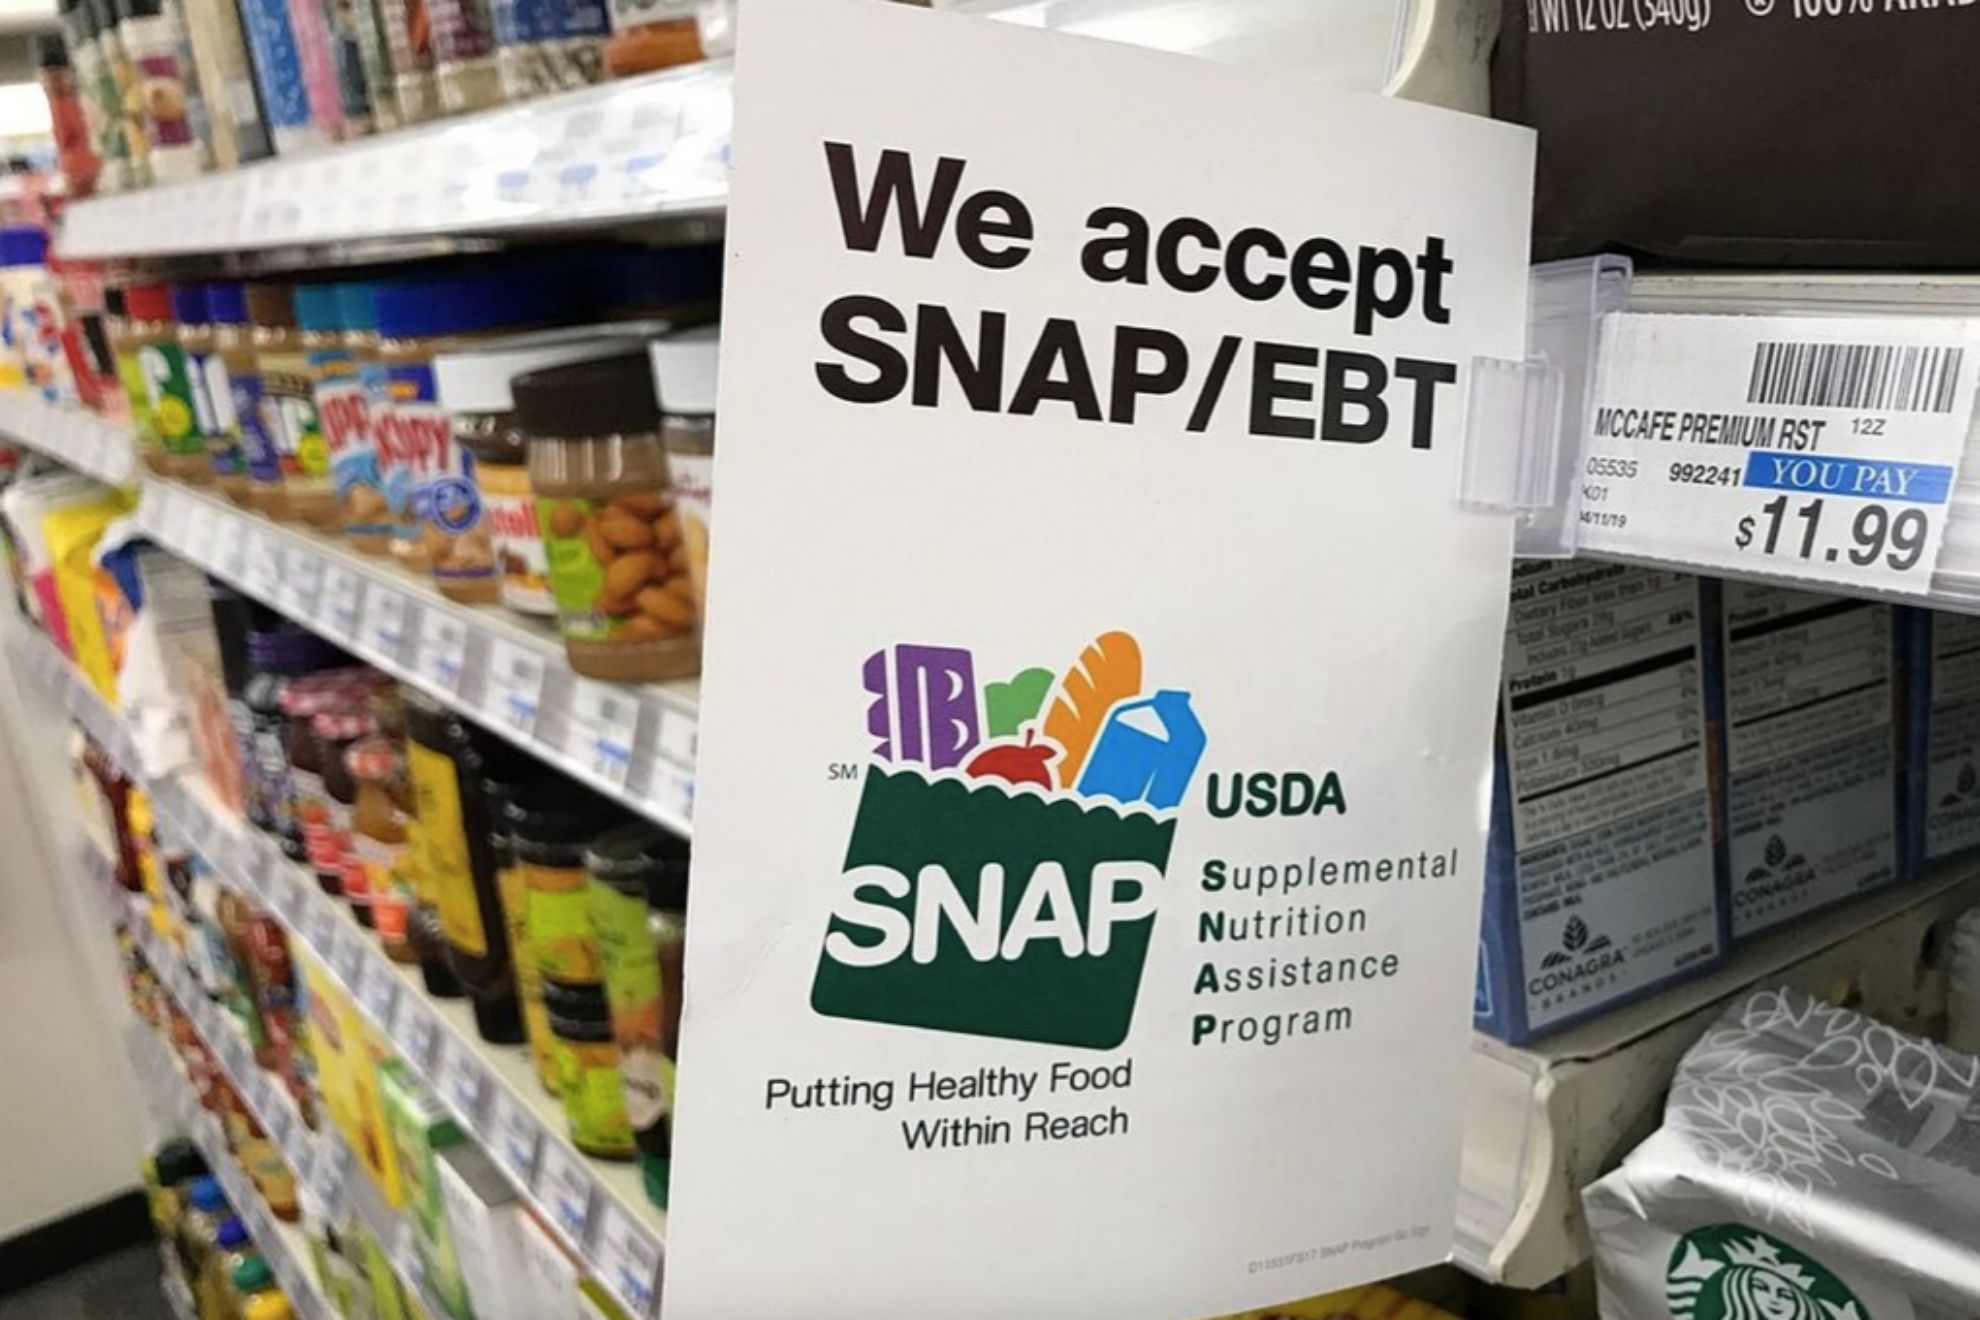 The Vermont EBT Card  Department for Children and Families